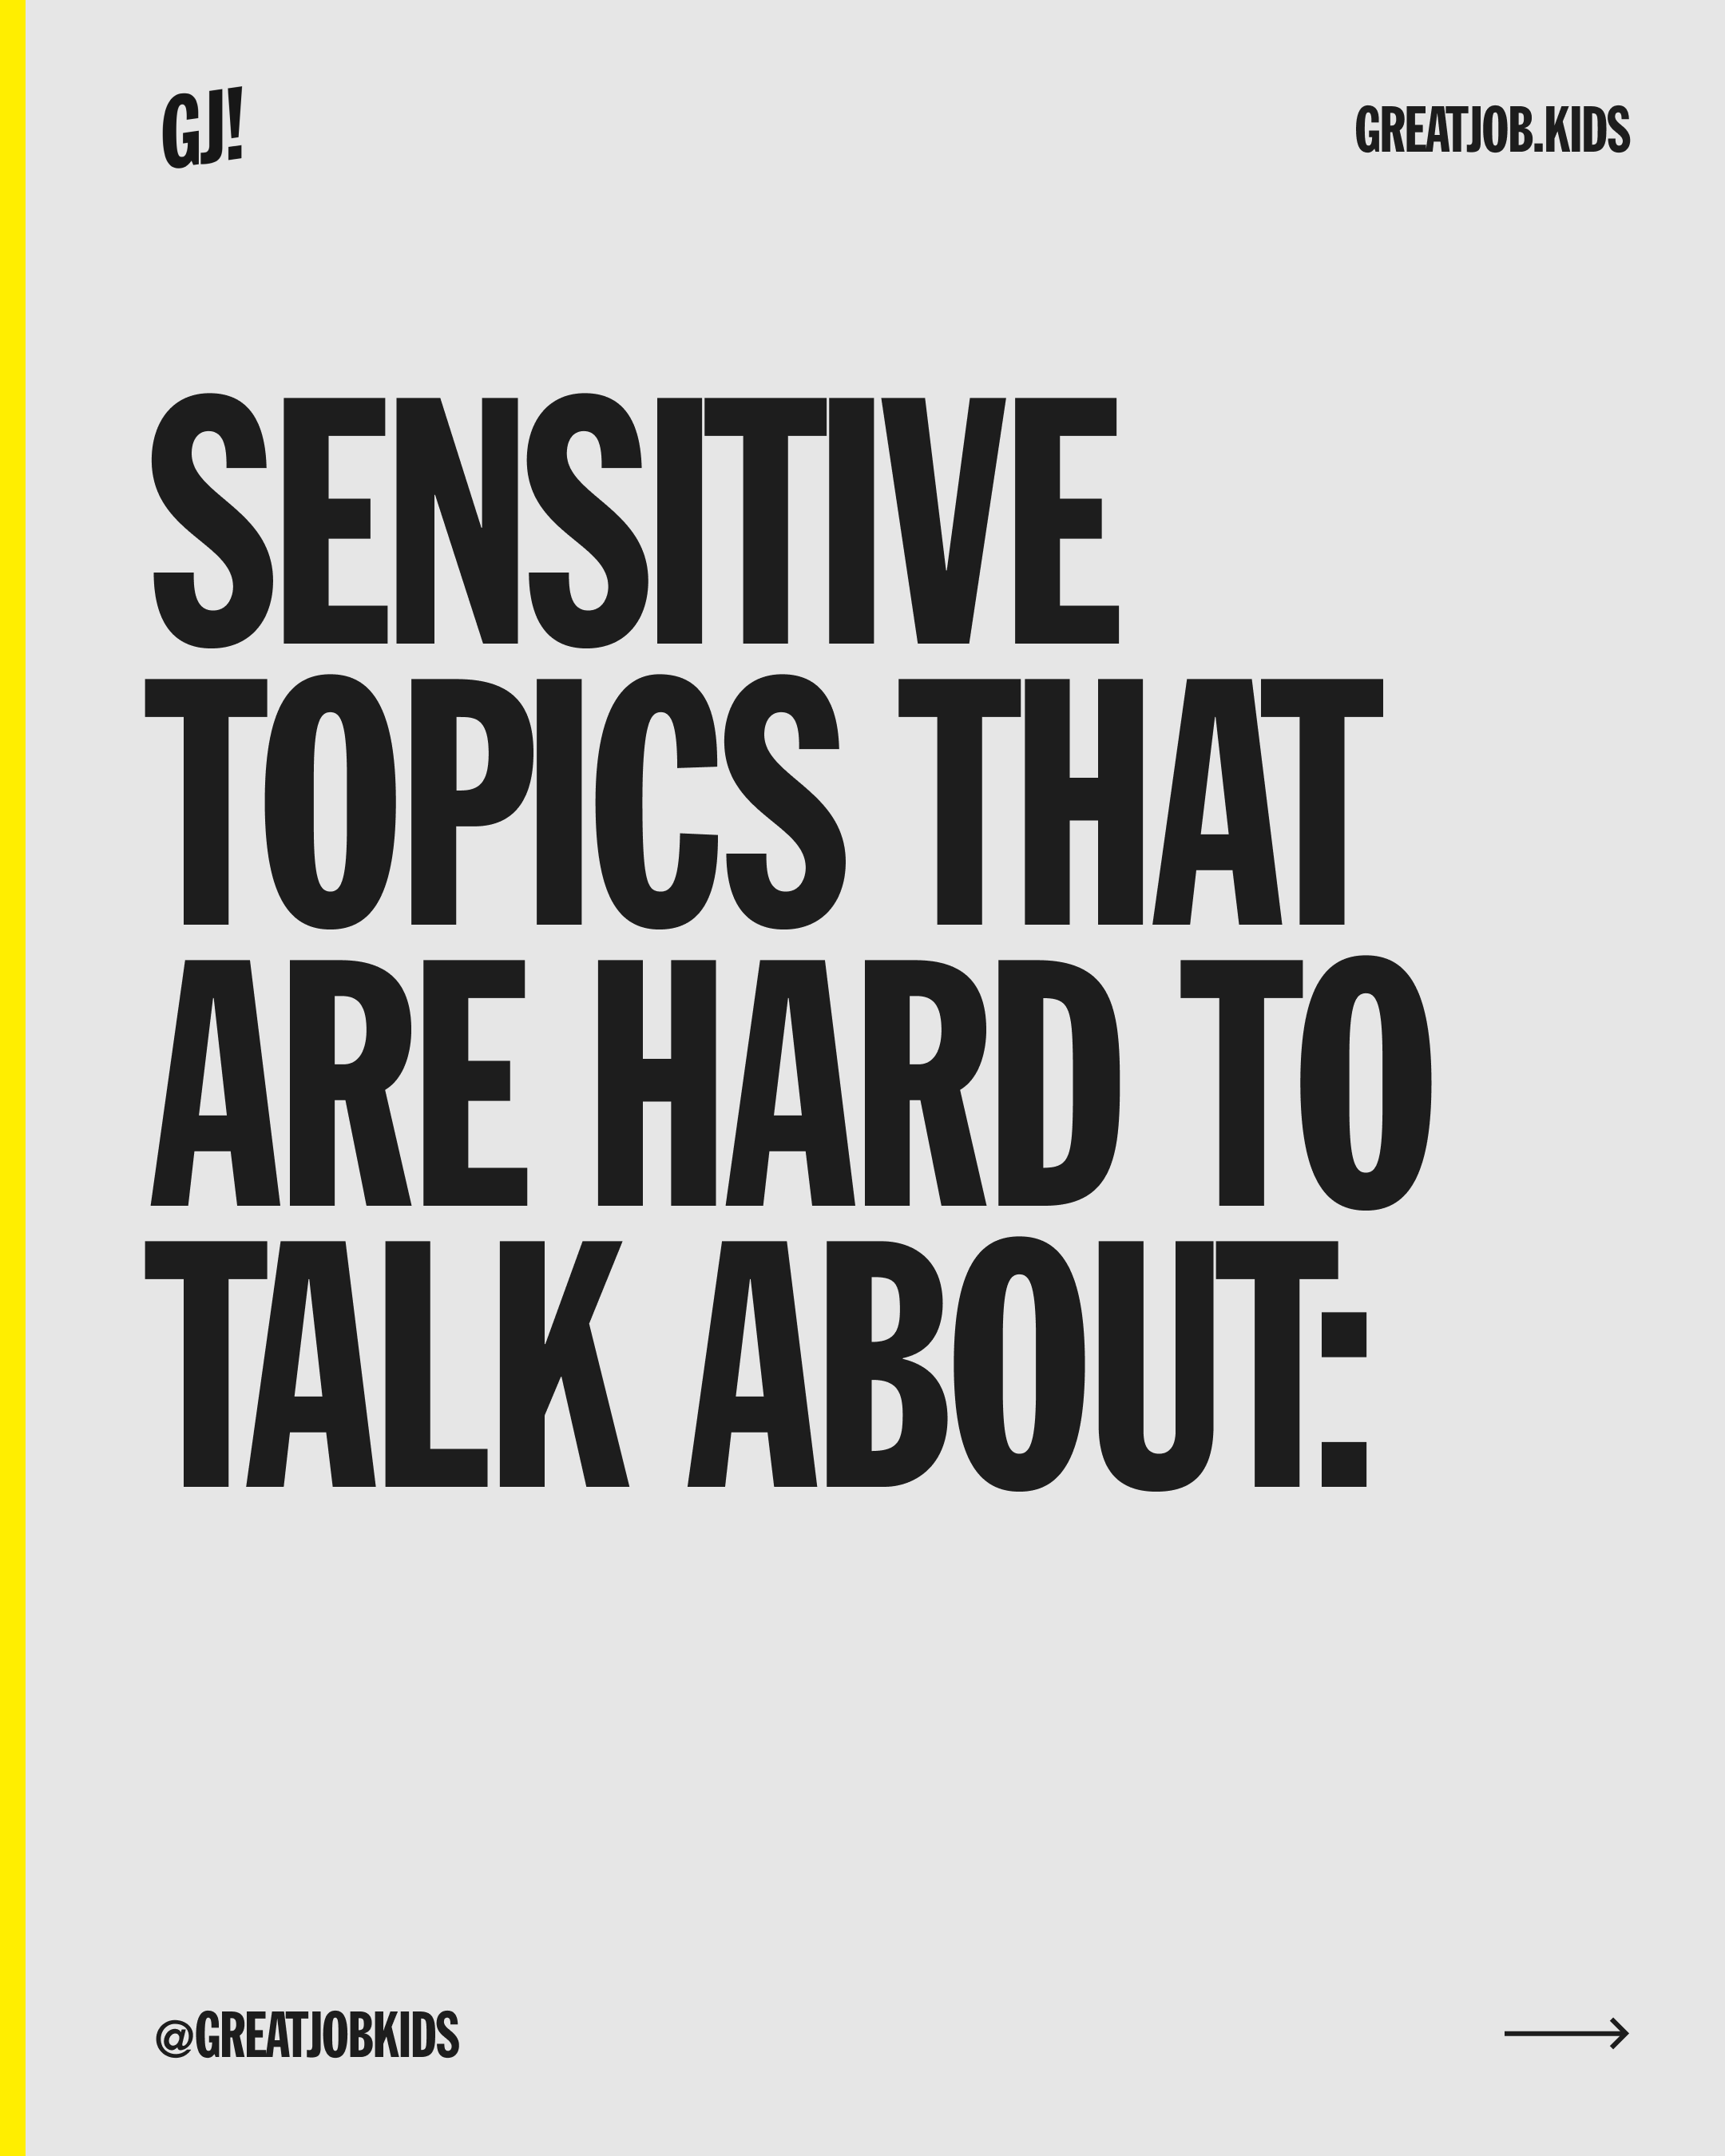 Sensitive topics that are hard to talk about